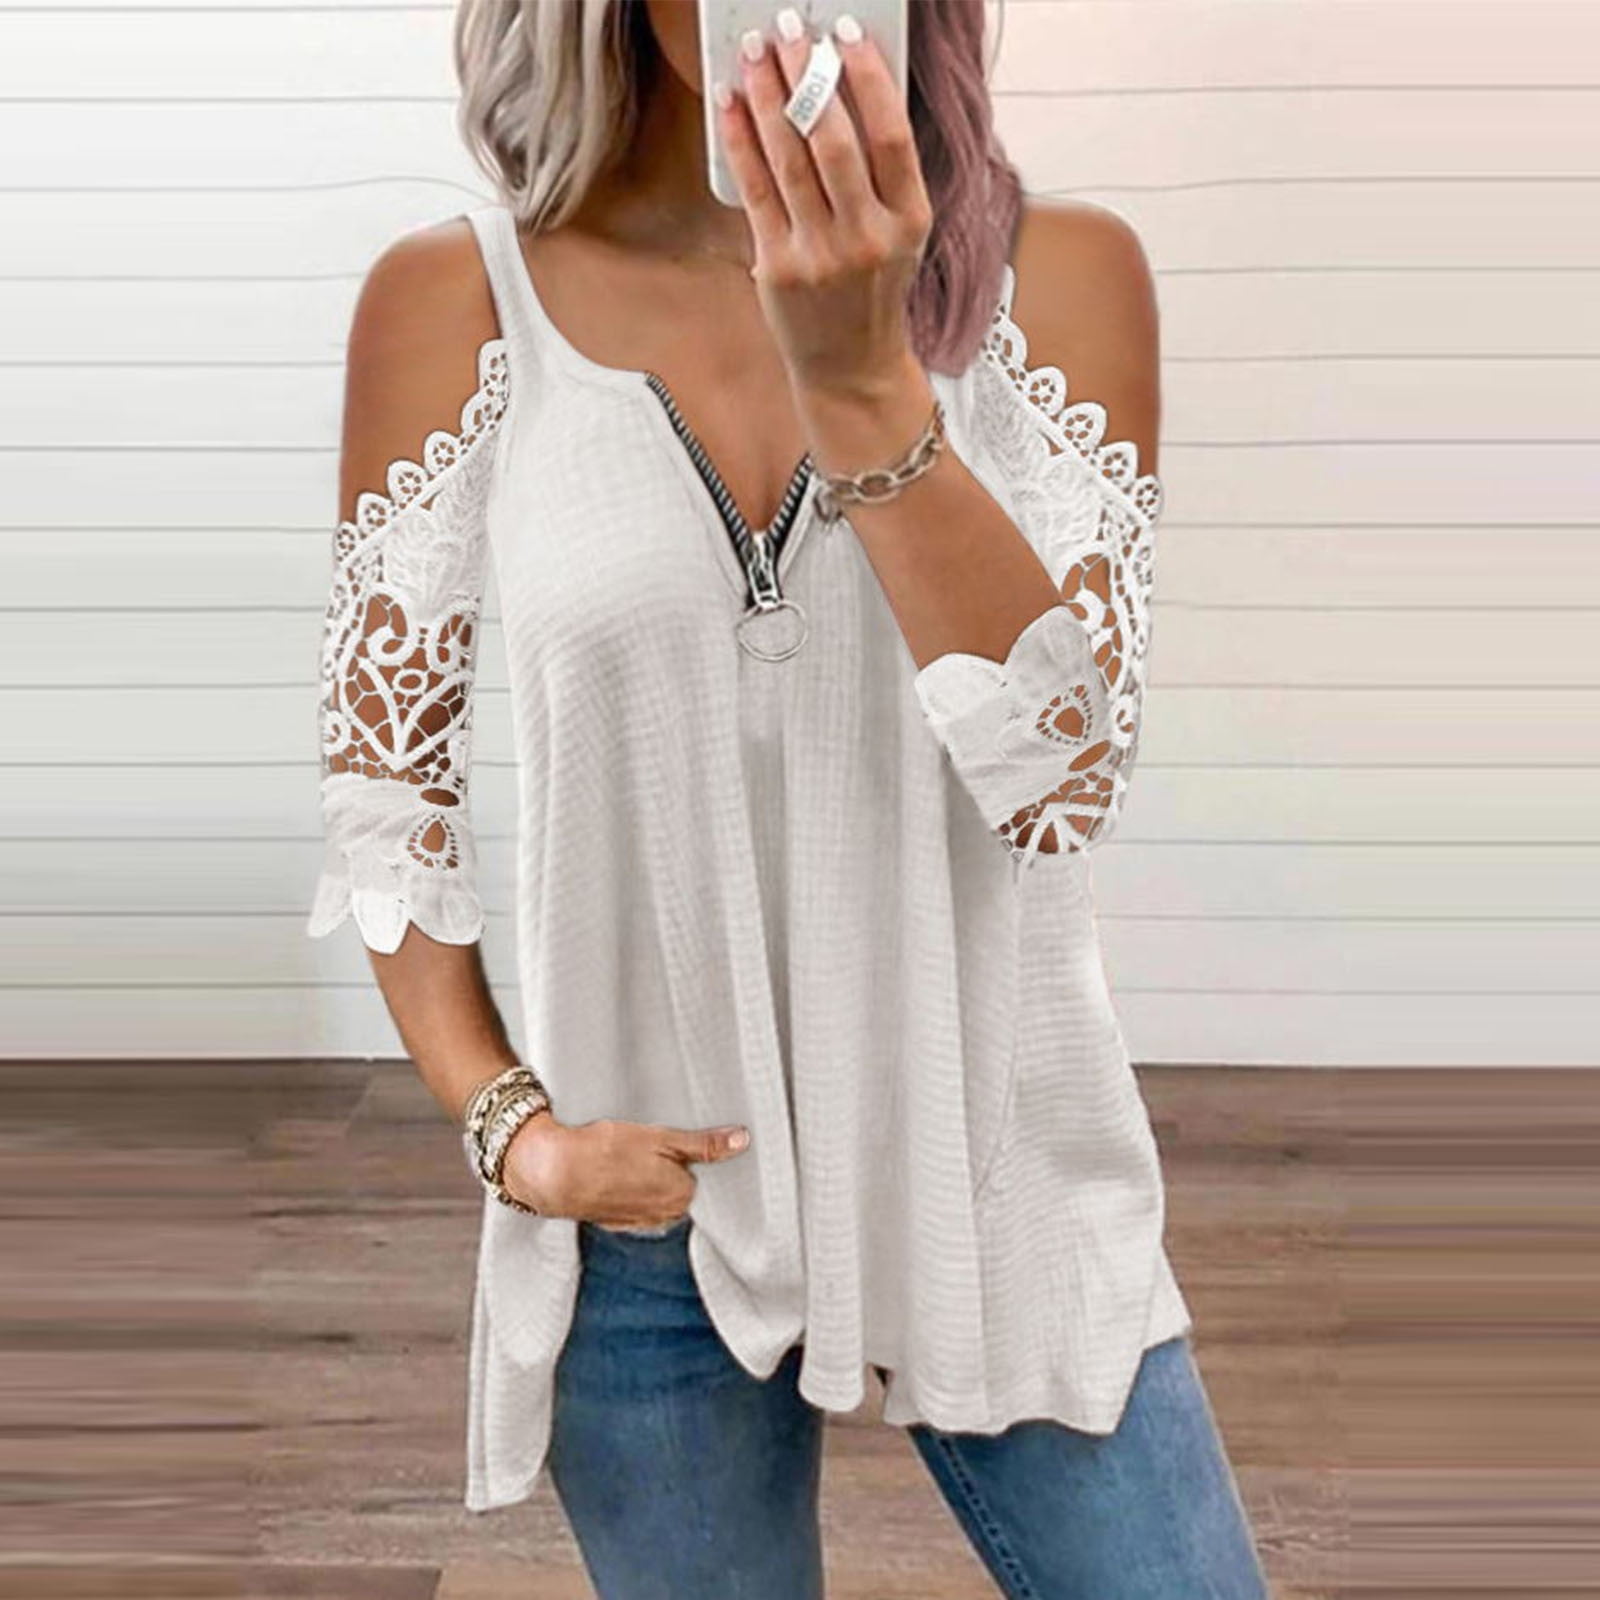 Womens Summer Cold Shoulder Lace Short Sleeve T-Shirt Tops Blouse Tee Plus Size 